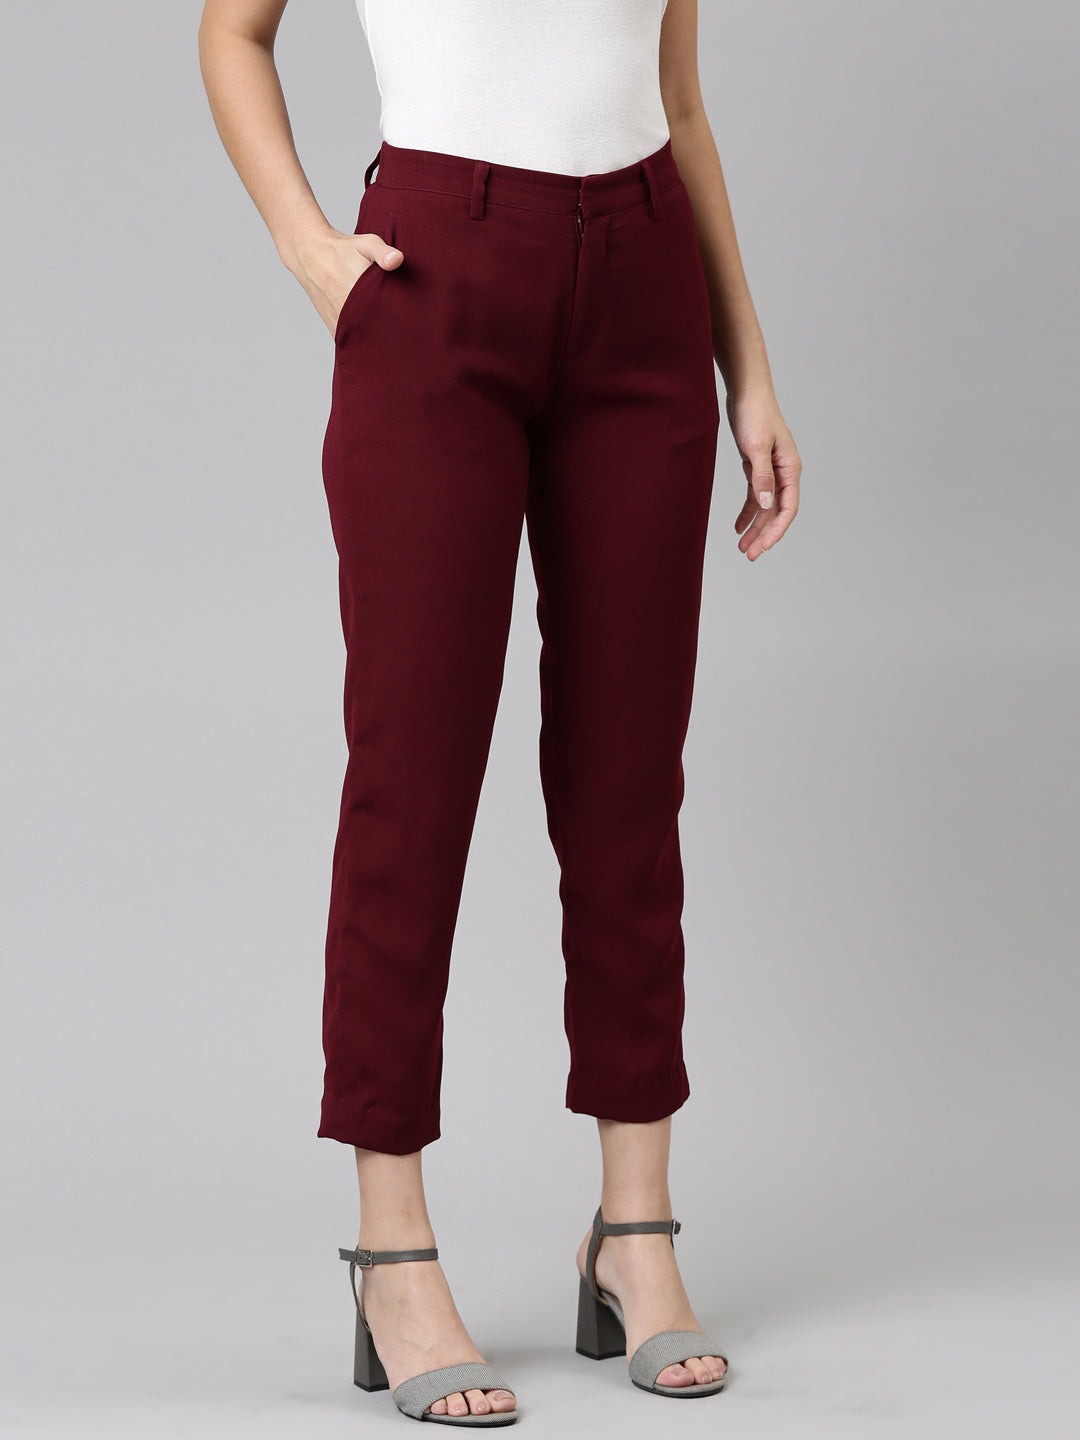 Go Colors Trousers and Pants  Buy Go Colors Women Light Pink Chinos  Trousers Online  Nykaa Fashion